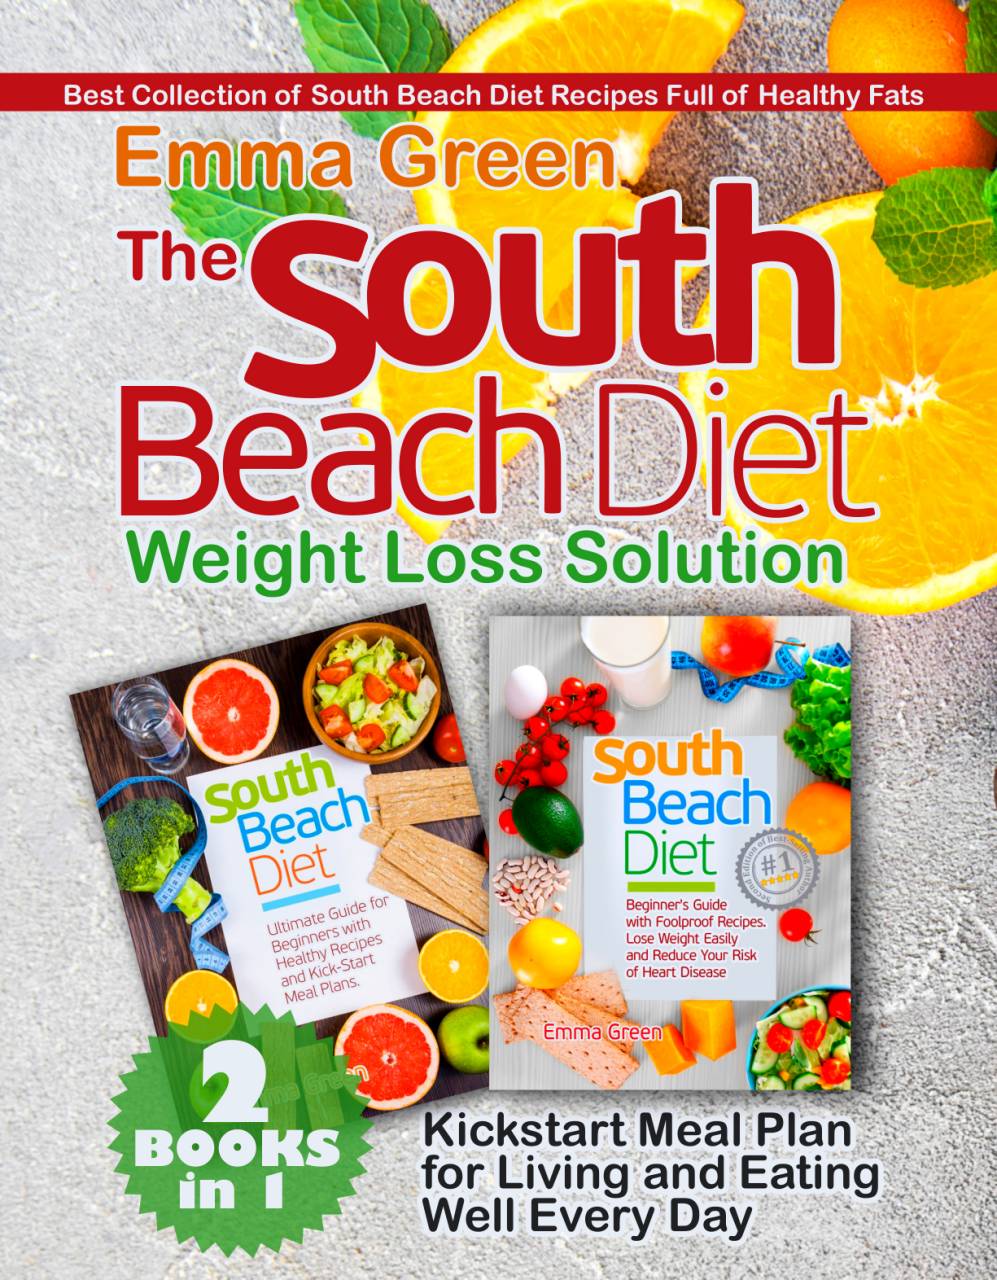 FREE: The South Beach Diet Weight Loss Solution: 2 BOOKS in 1 by Emma Green